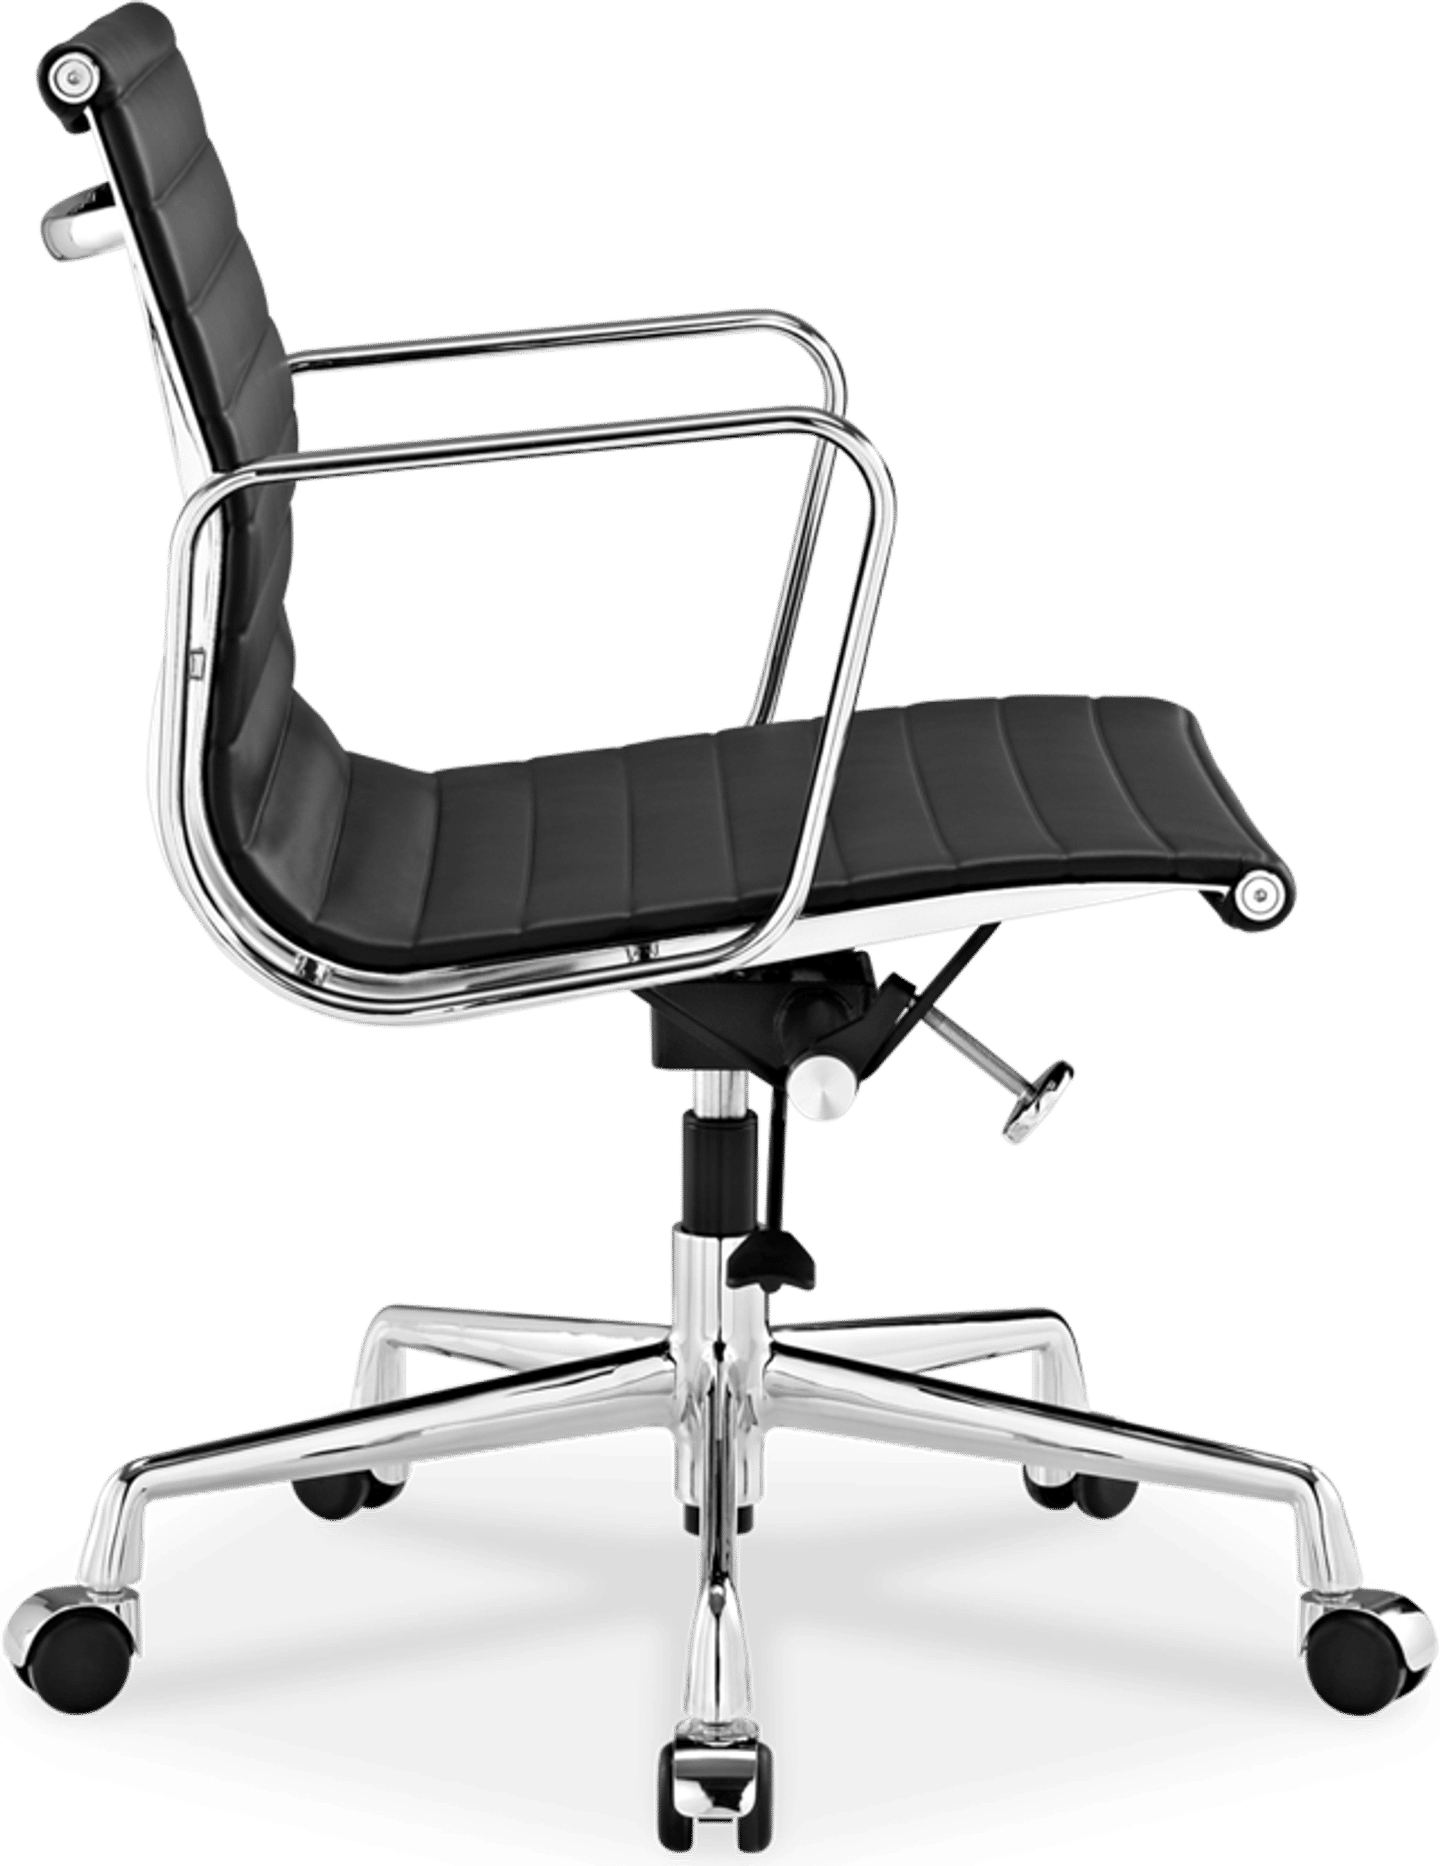 Eames Style Office Chair EA117 Leather Black image.